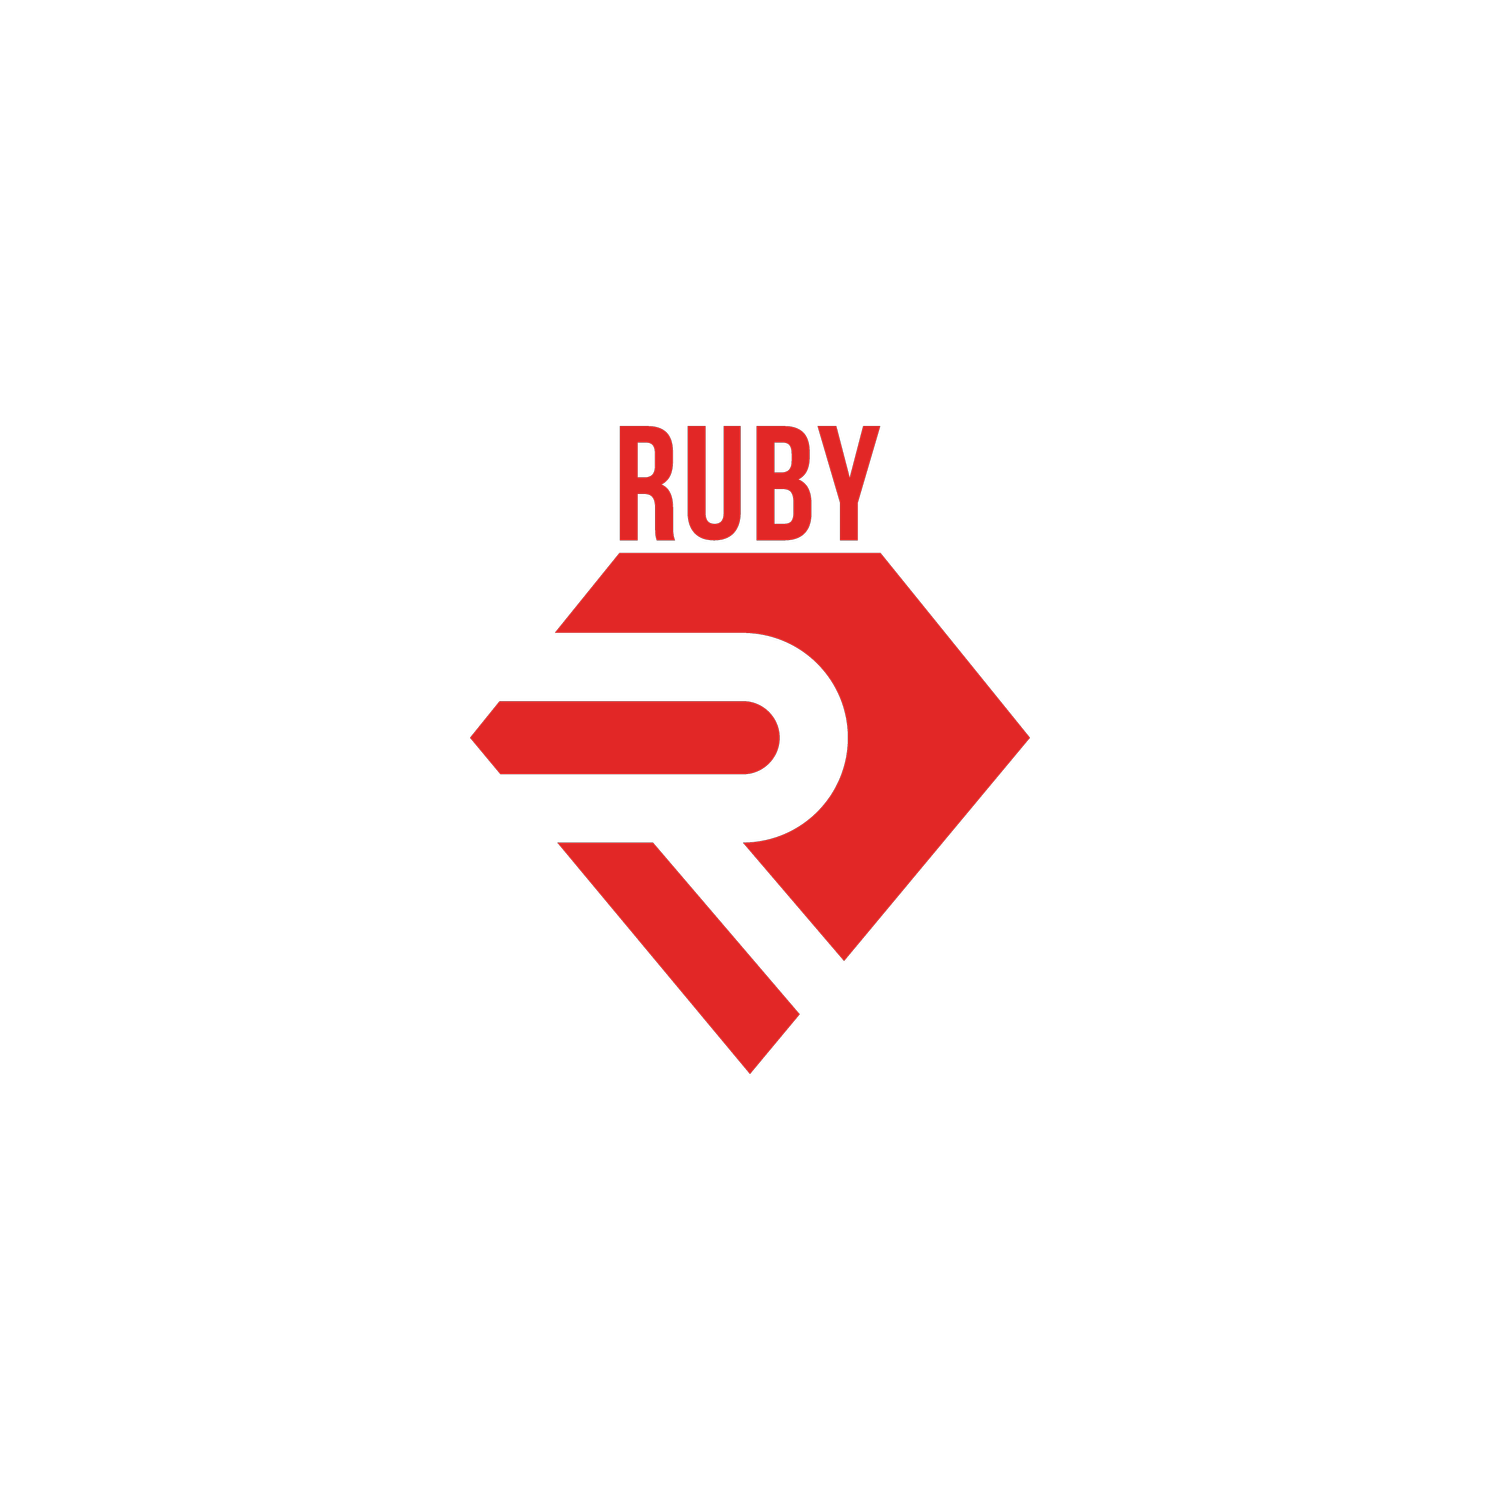 ruby carts disposable